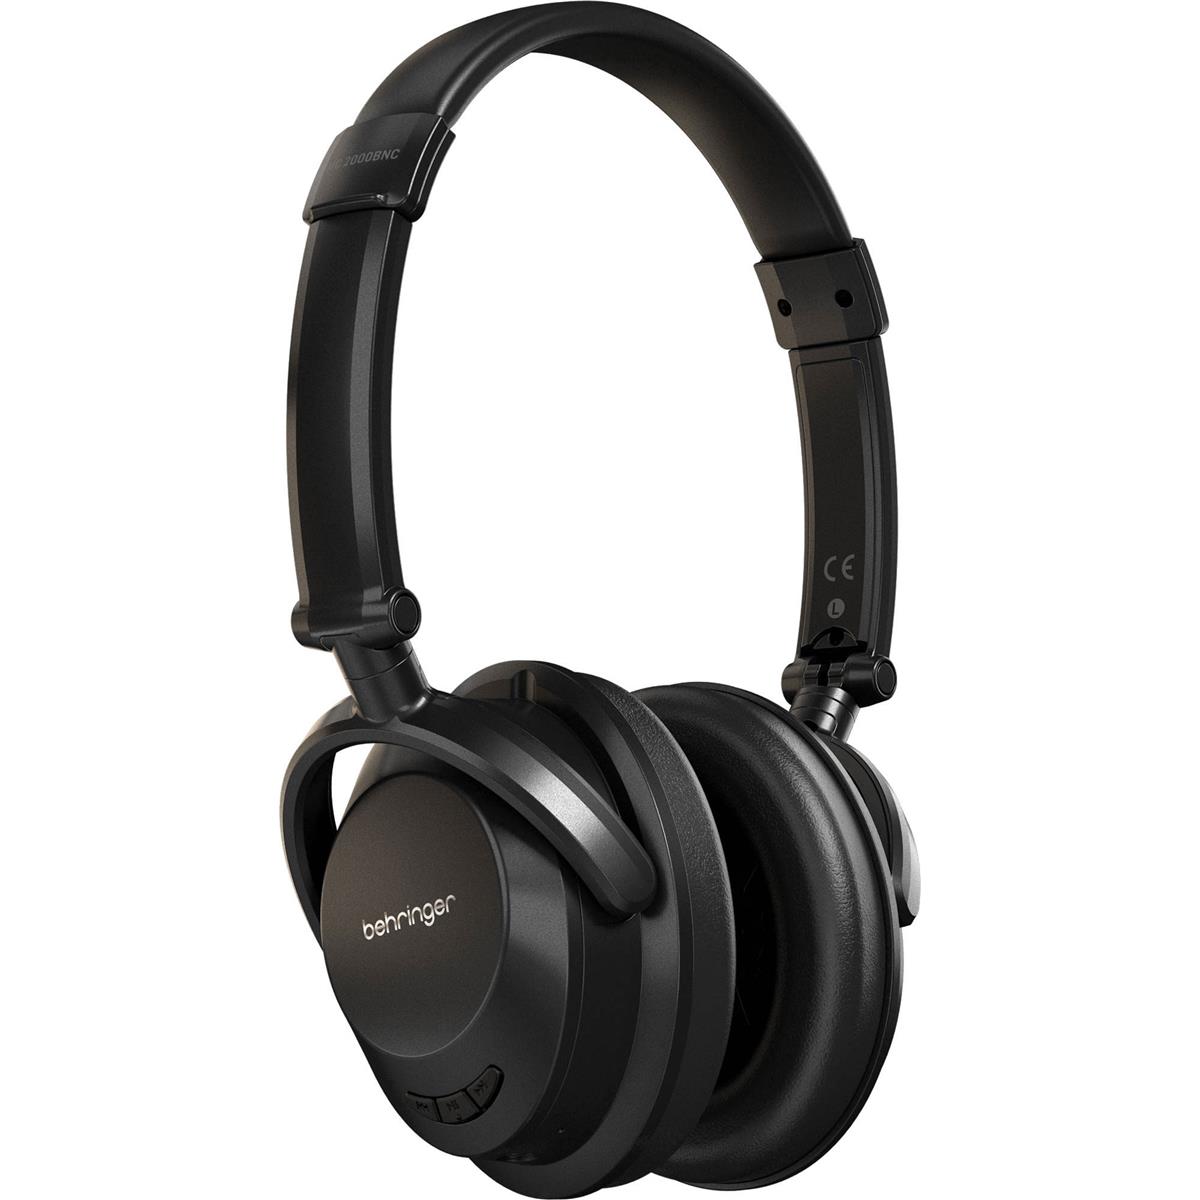 Image of Behringer HC 2000BNC Wireless Active NC Headphones with Bluetooth Connectivity